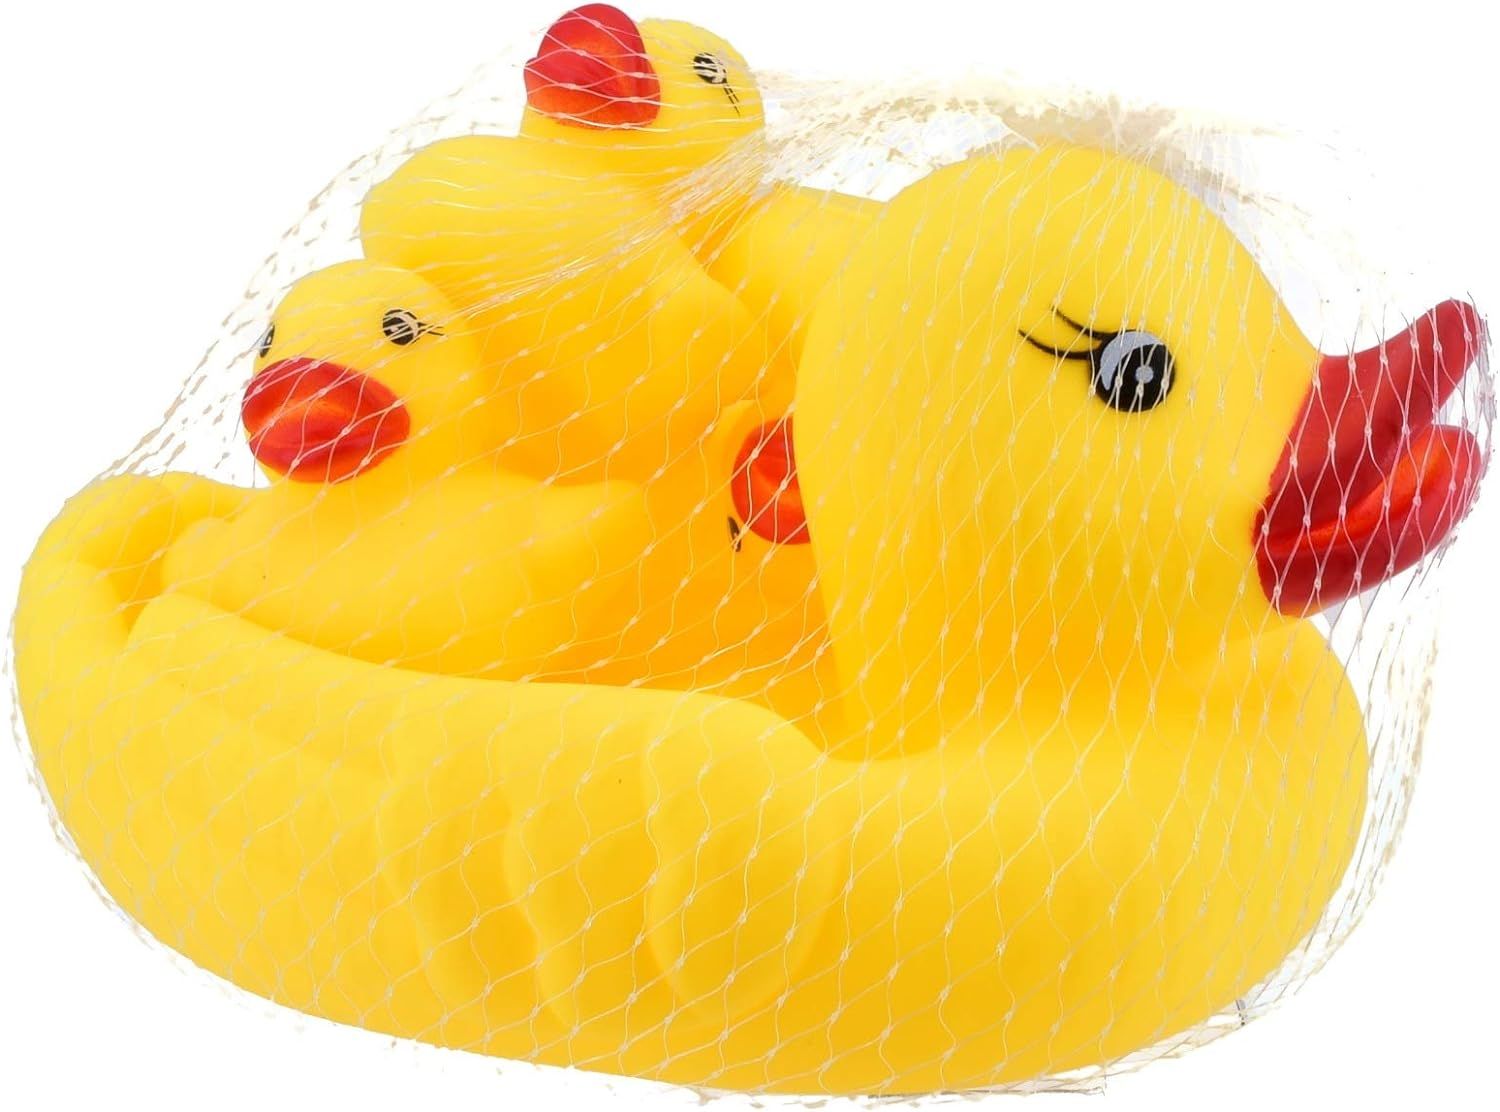 A group of rubber ducks in a net Description automatically generated